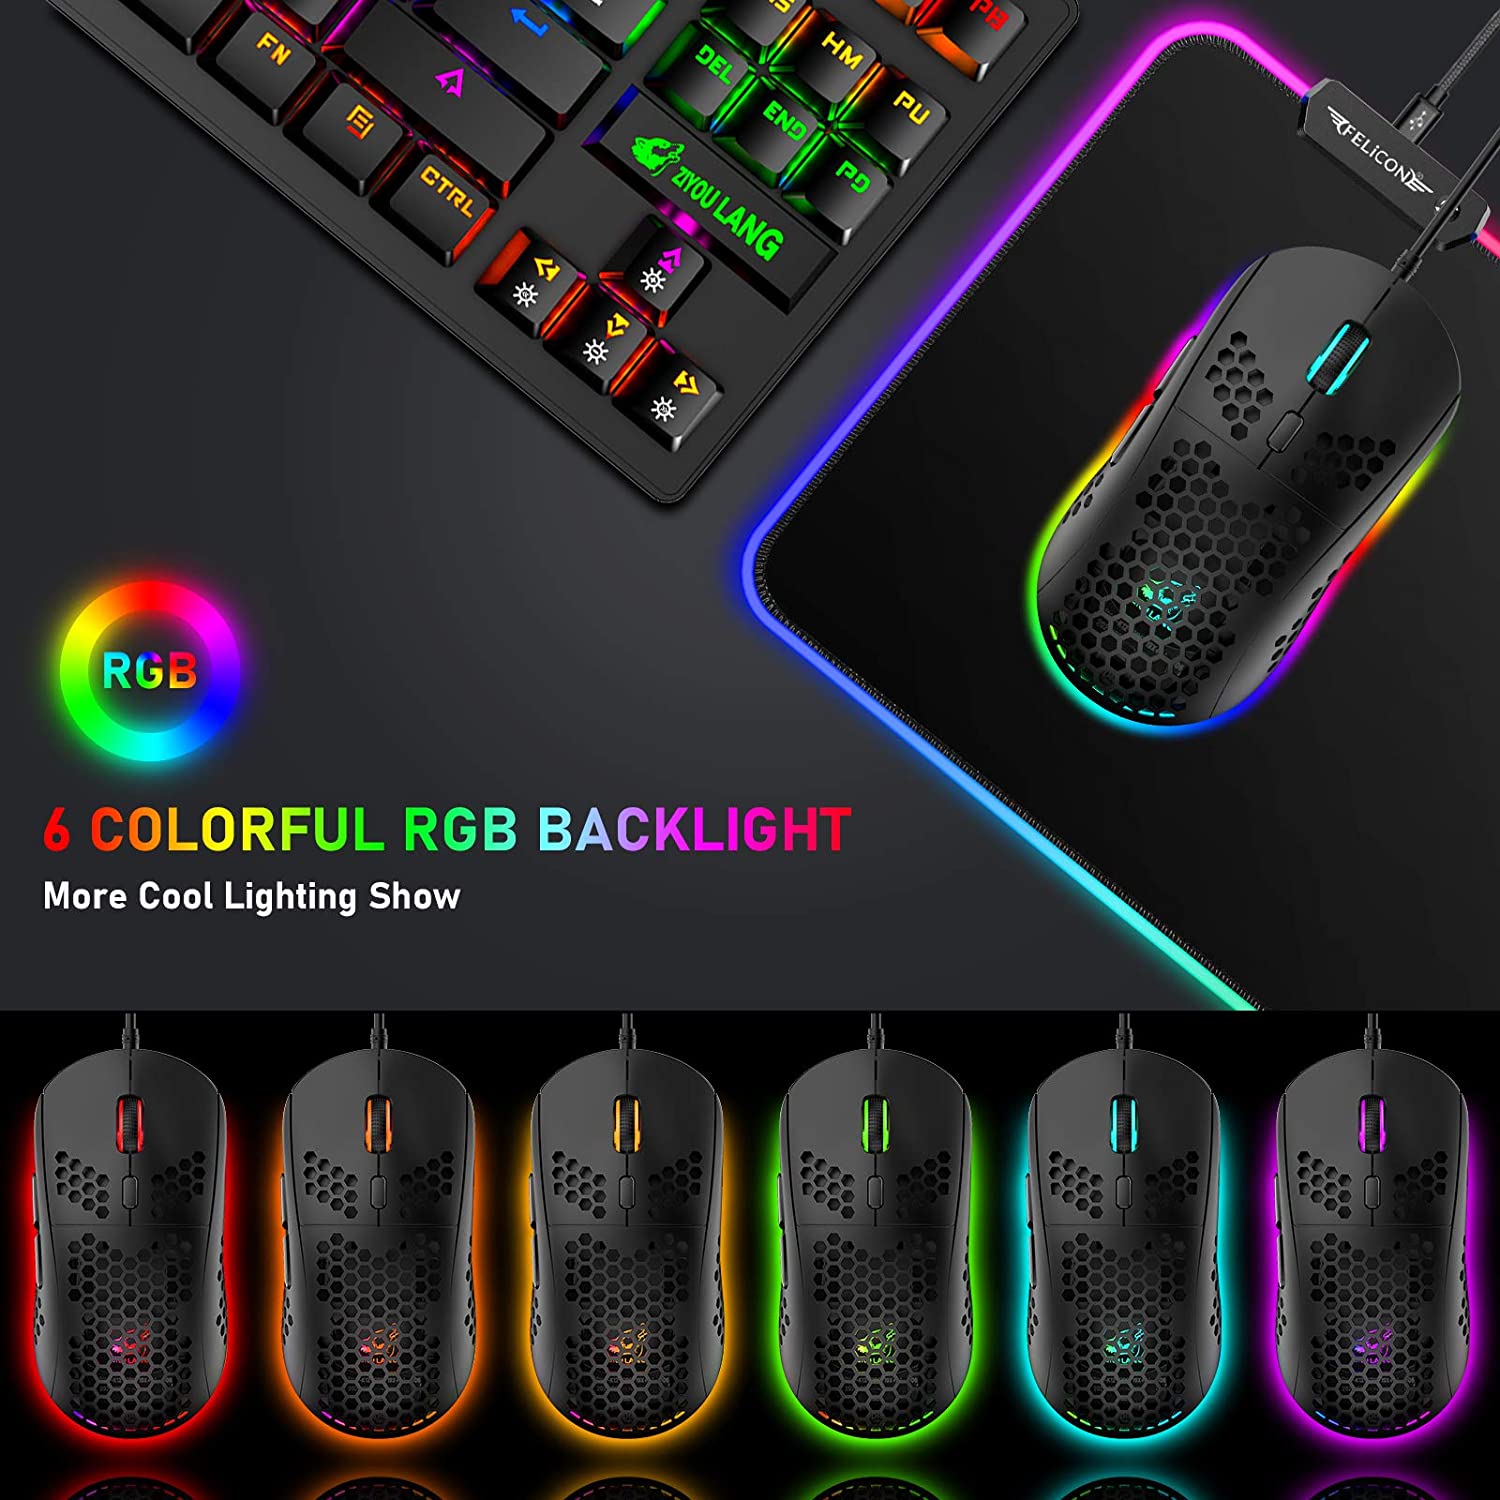 96G Programmable Gaming Mouse with Lightweight Honeycomb Shell,6400 DPI Laser Sensor,RGB Rainbow Bac